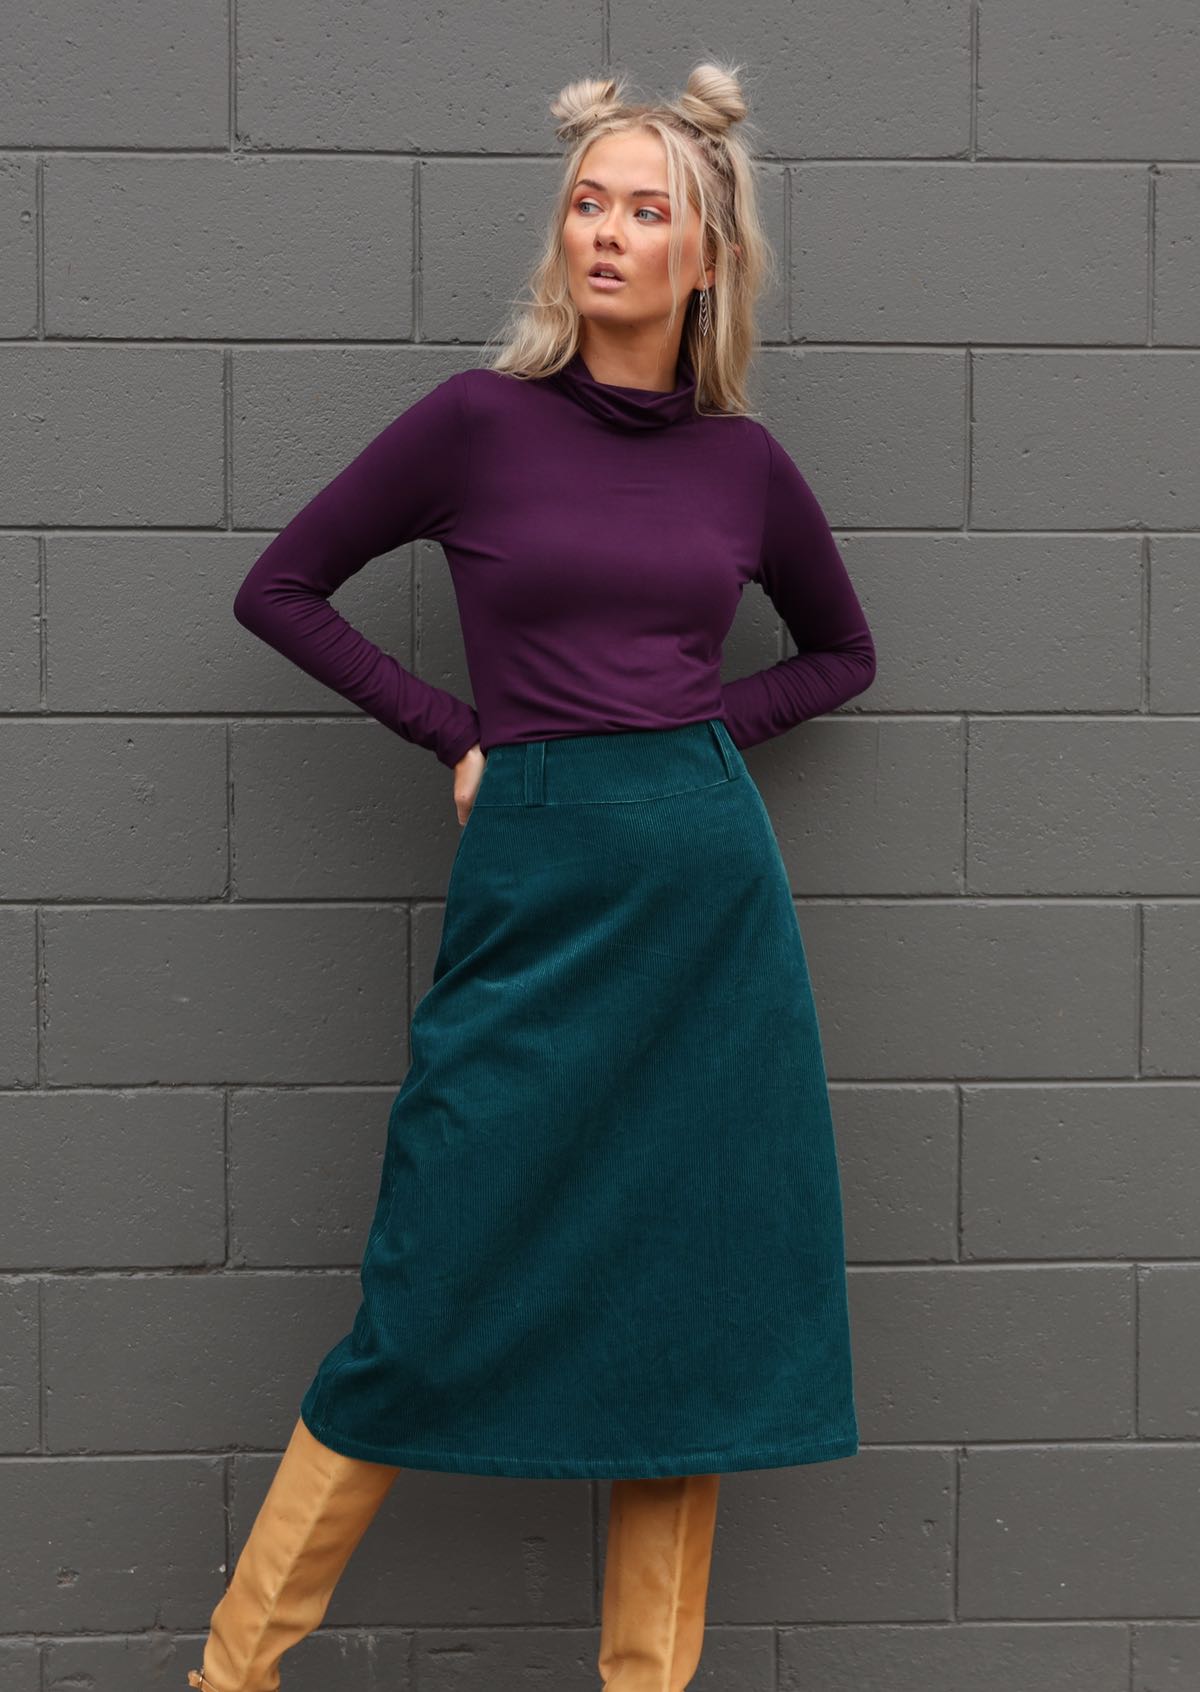 Cotton corduroy A-line skirt in deep teal